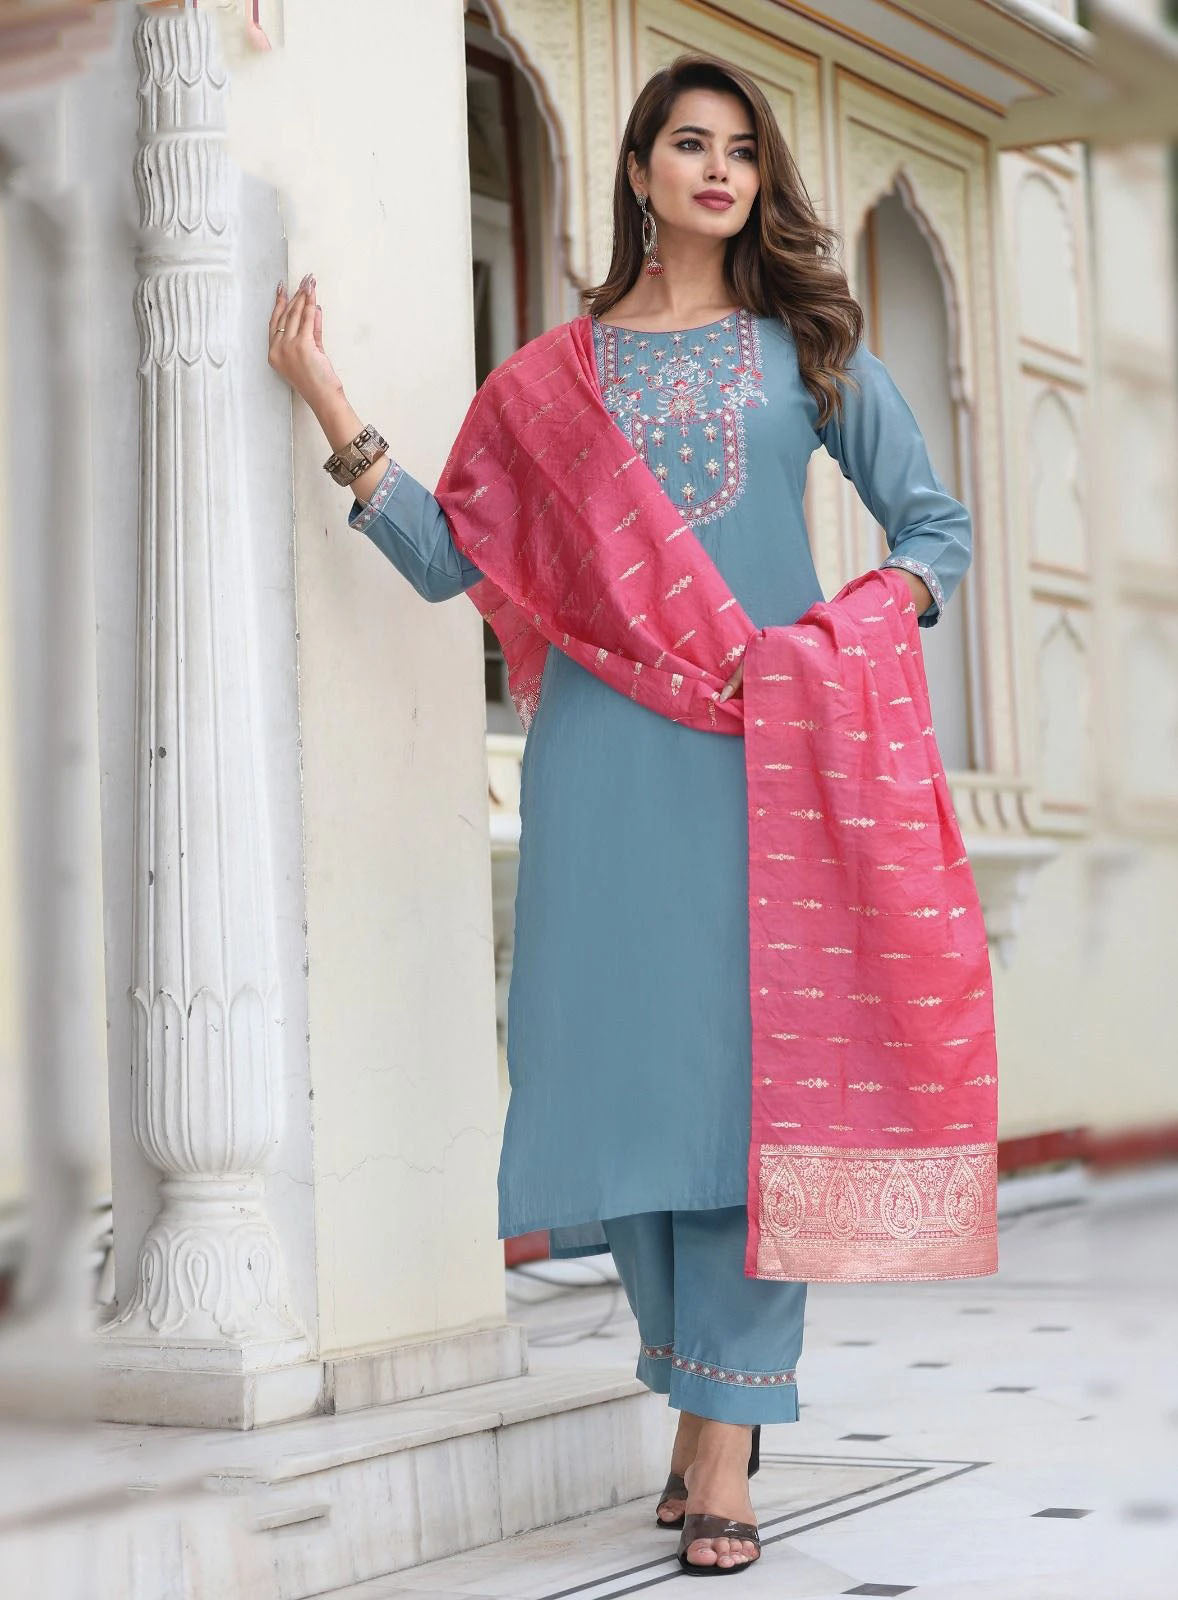 Dazzling Sky Blue Color Maslin Embroidery Work Kurti With Dupatta